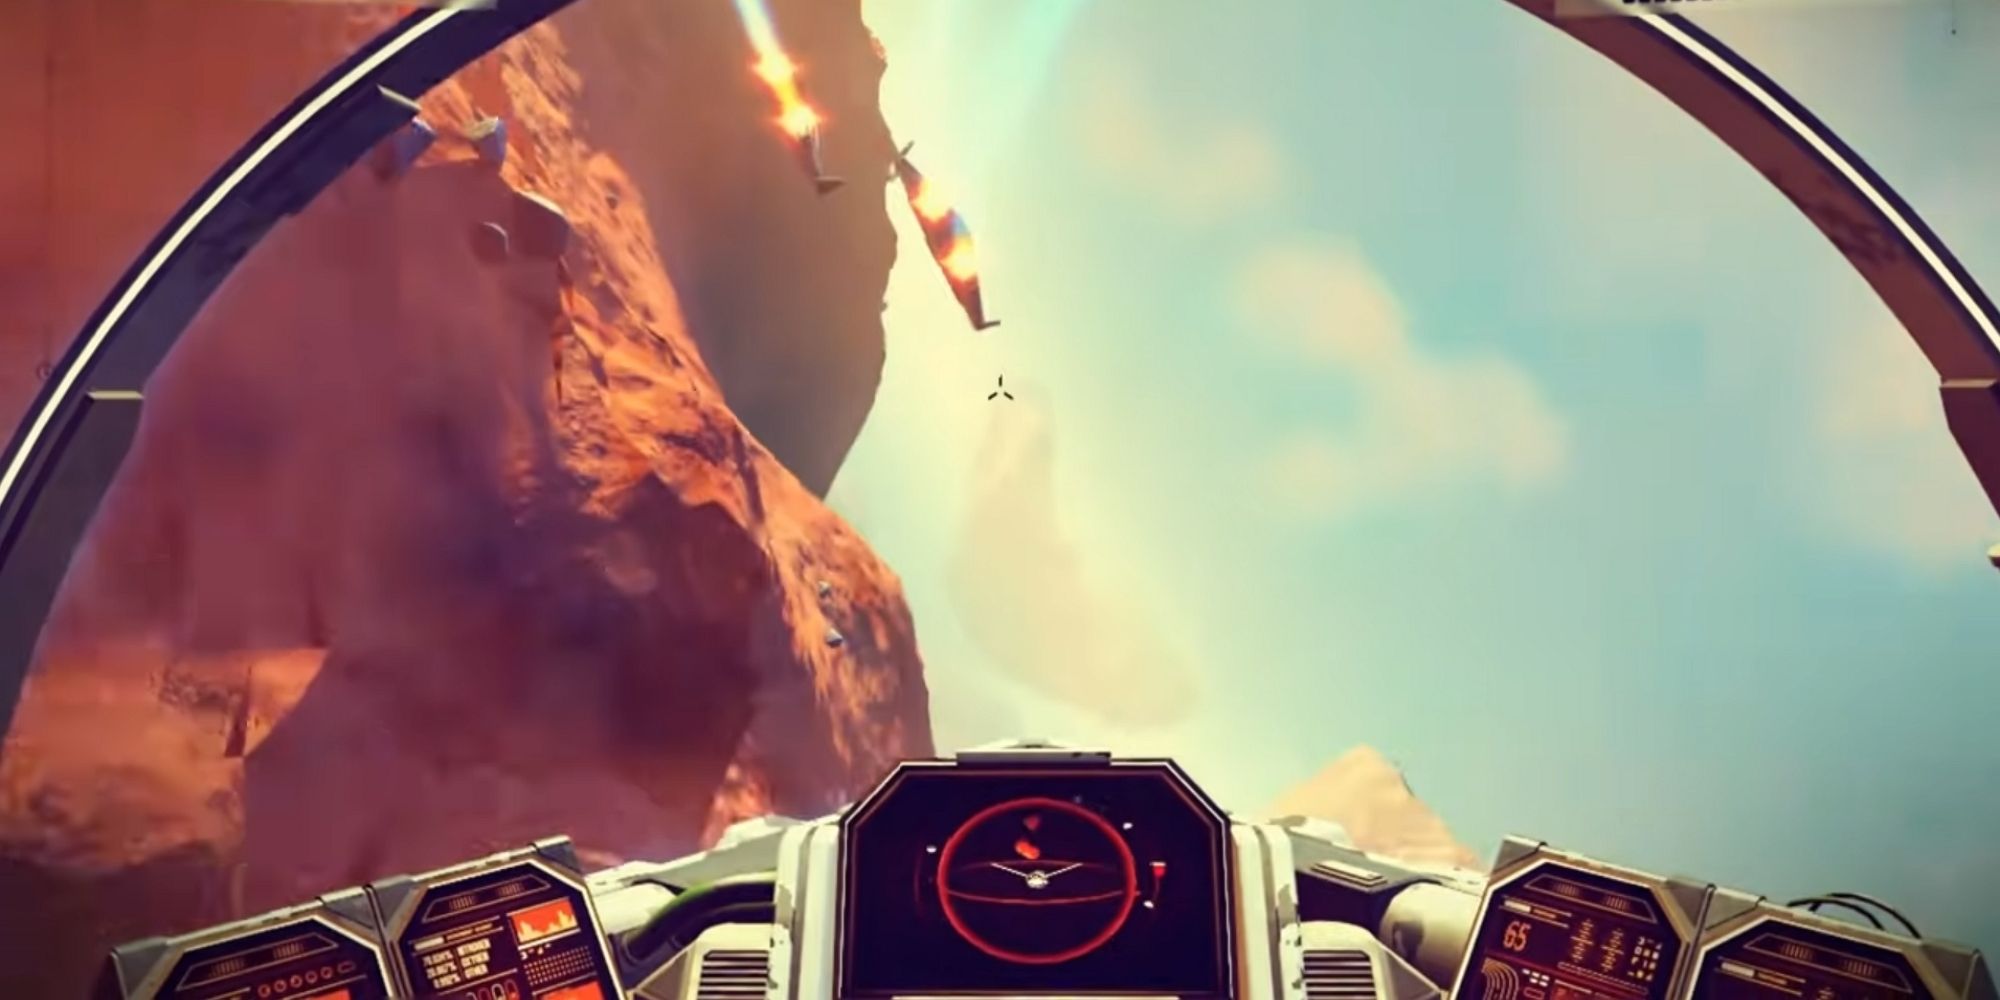 Travel to a new planet in No Man's Sky